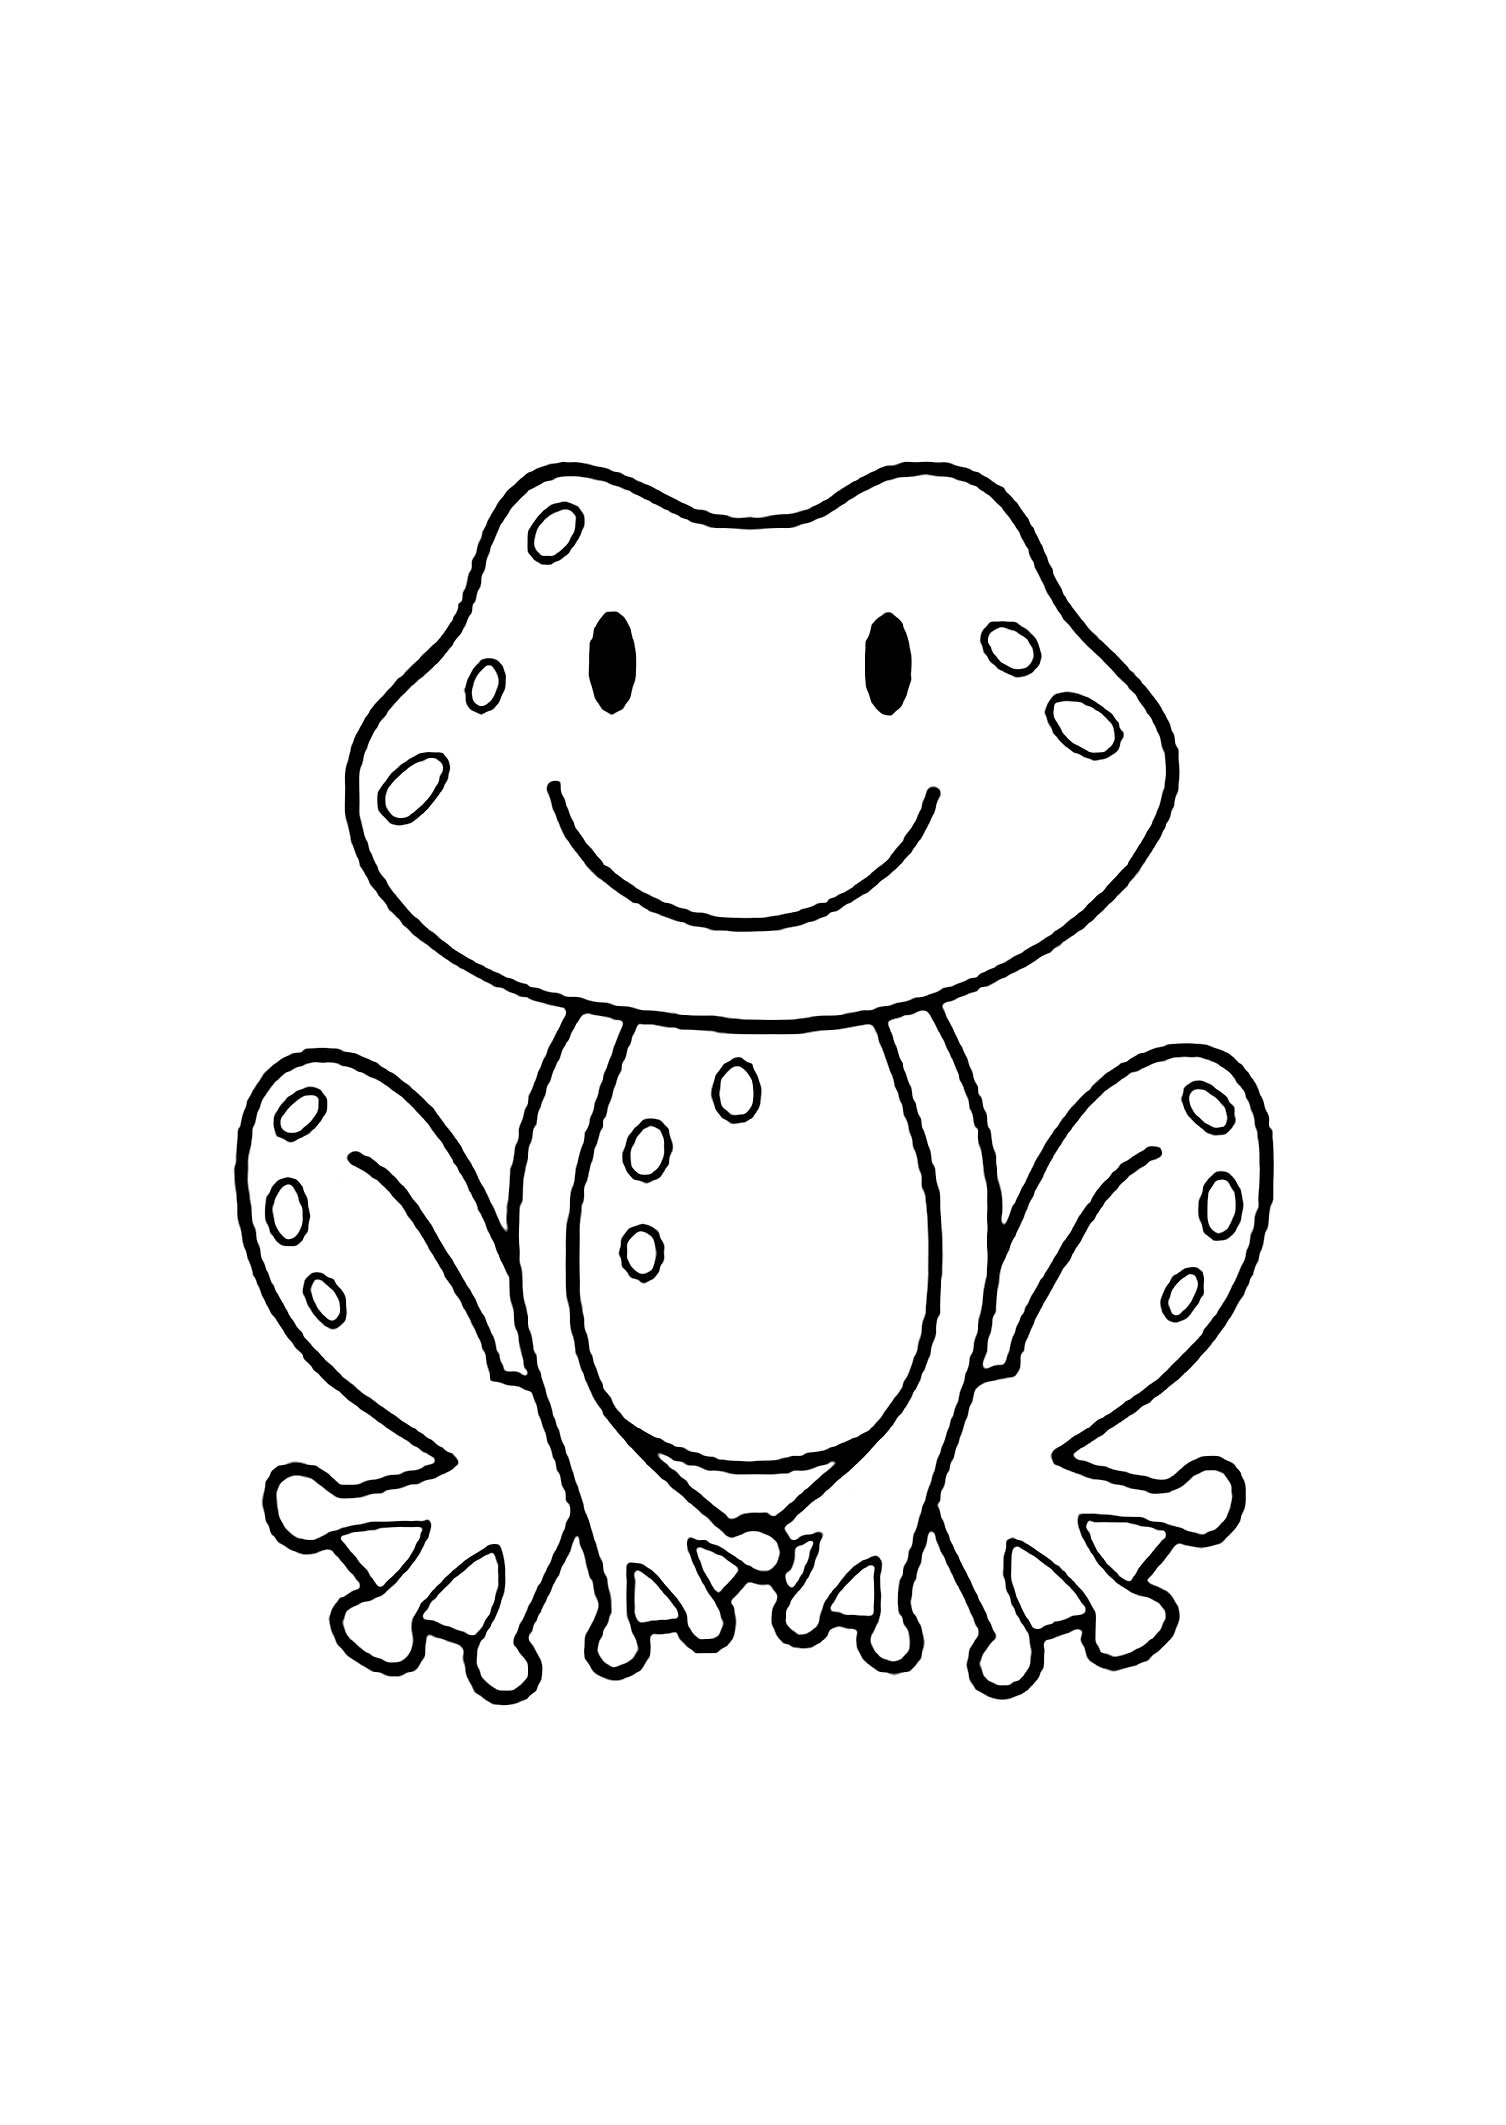 Frog coloring pages for children - Frogs Kids Coloring Pages